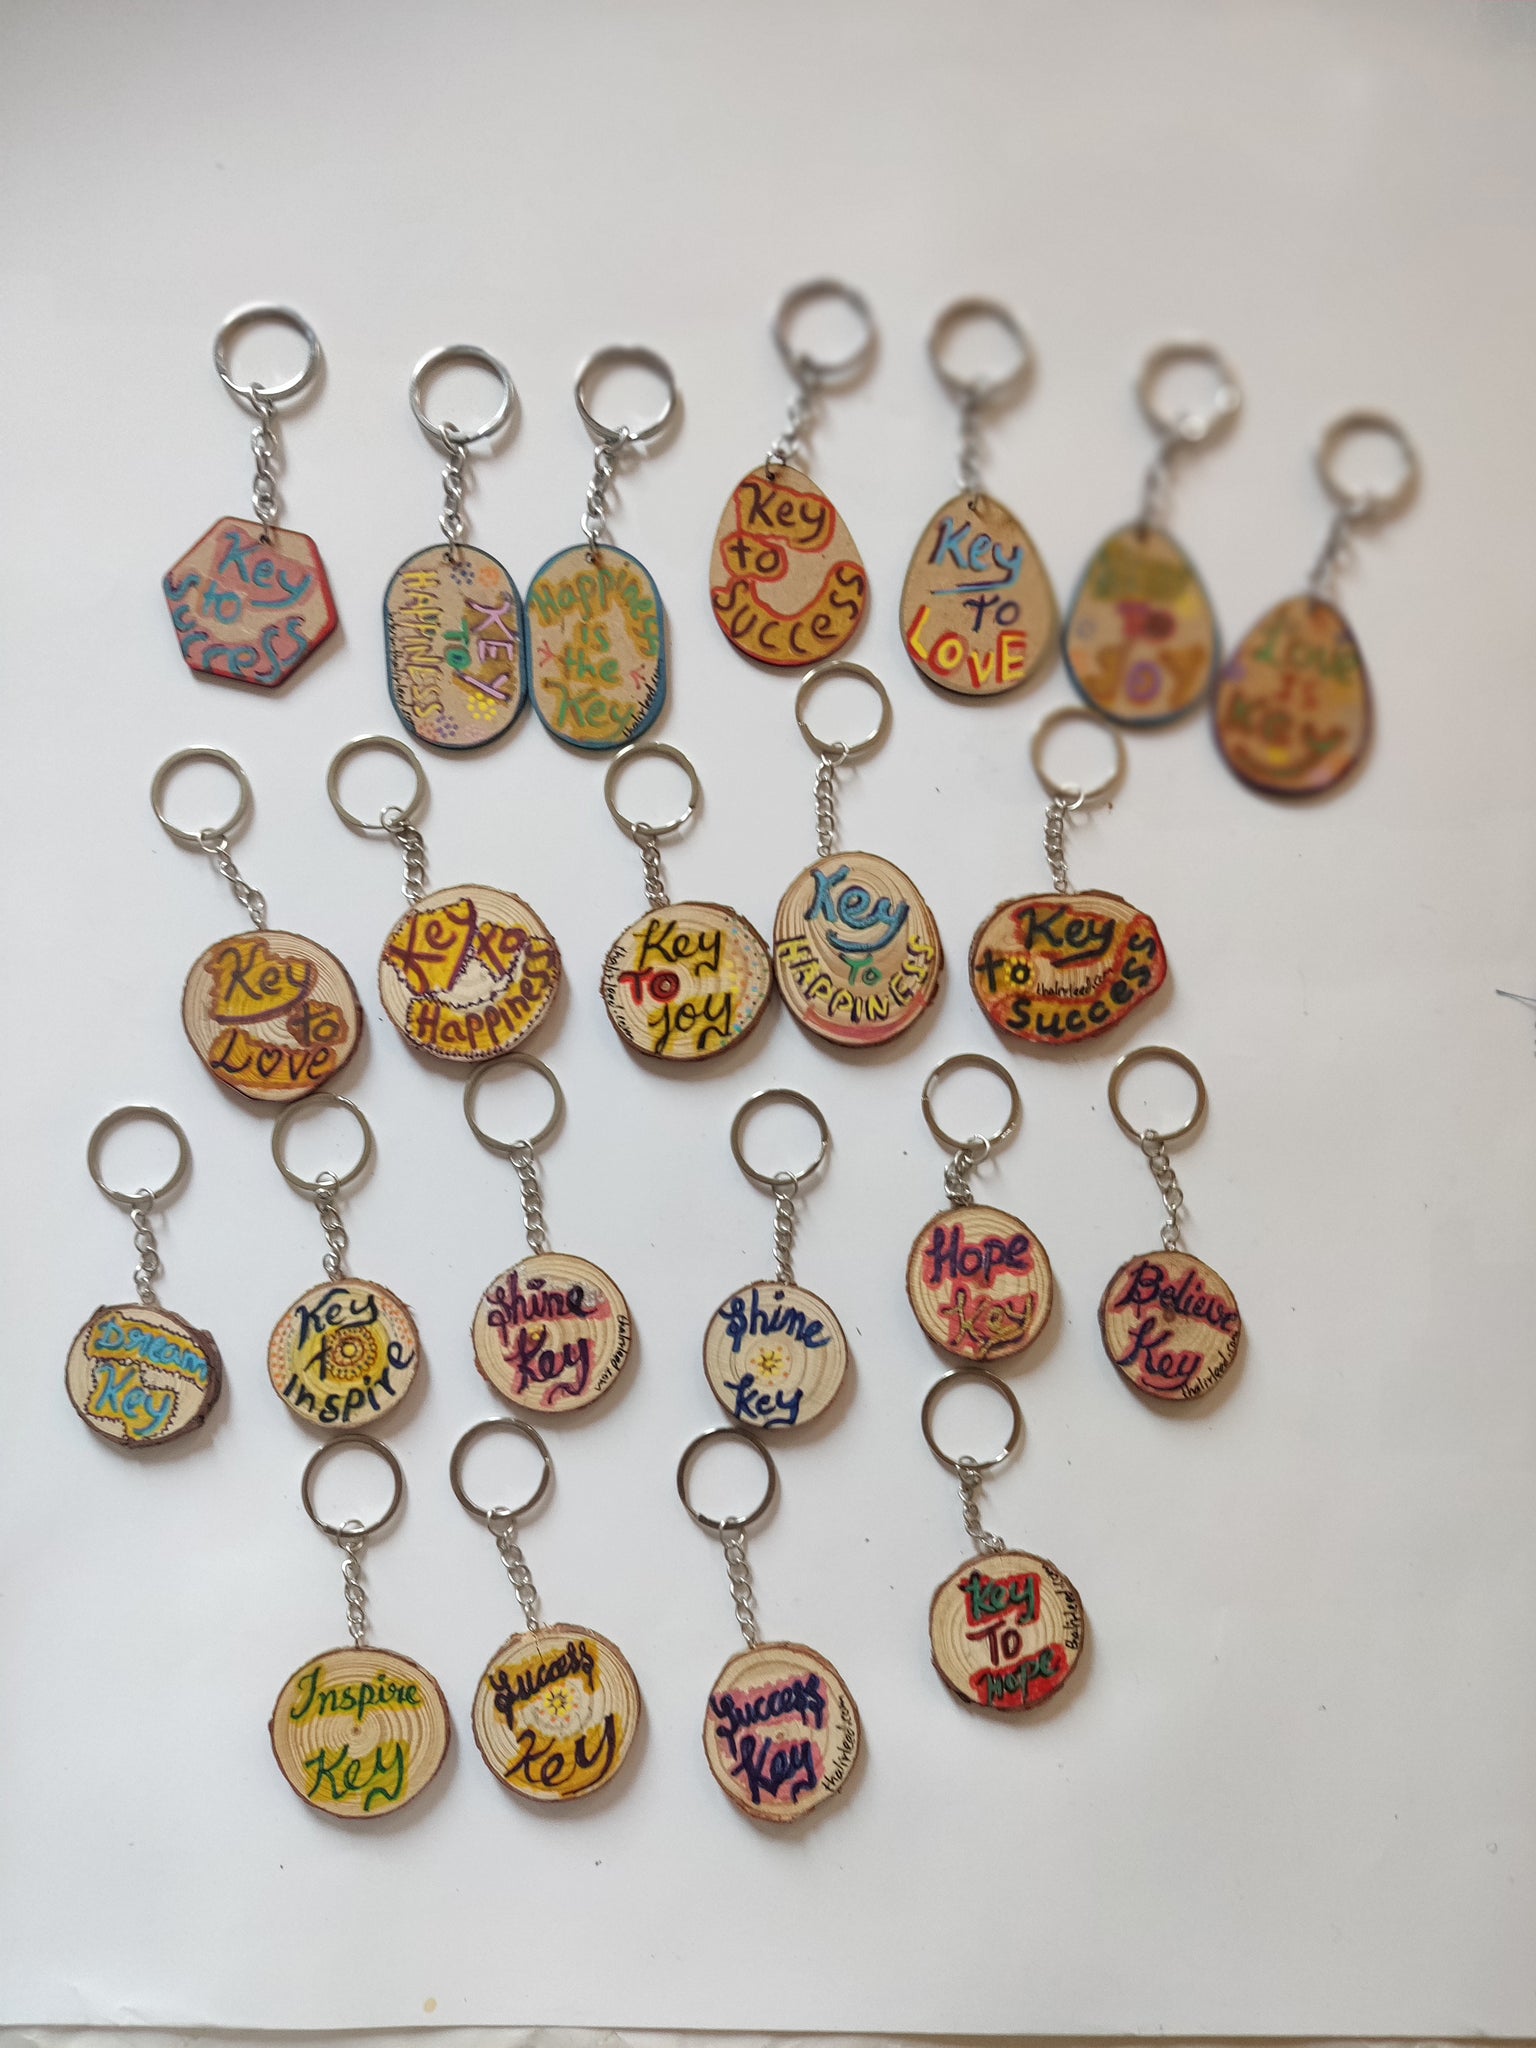 TLDIY-006-key chains for bulk gifts